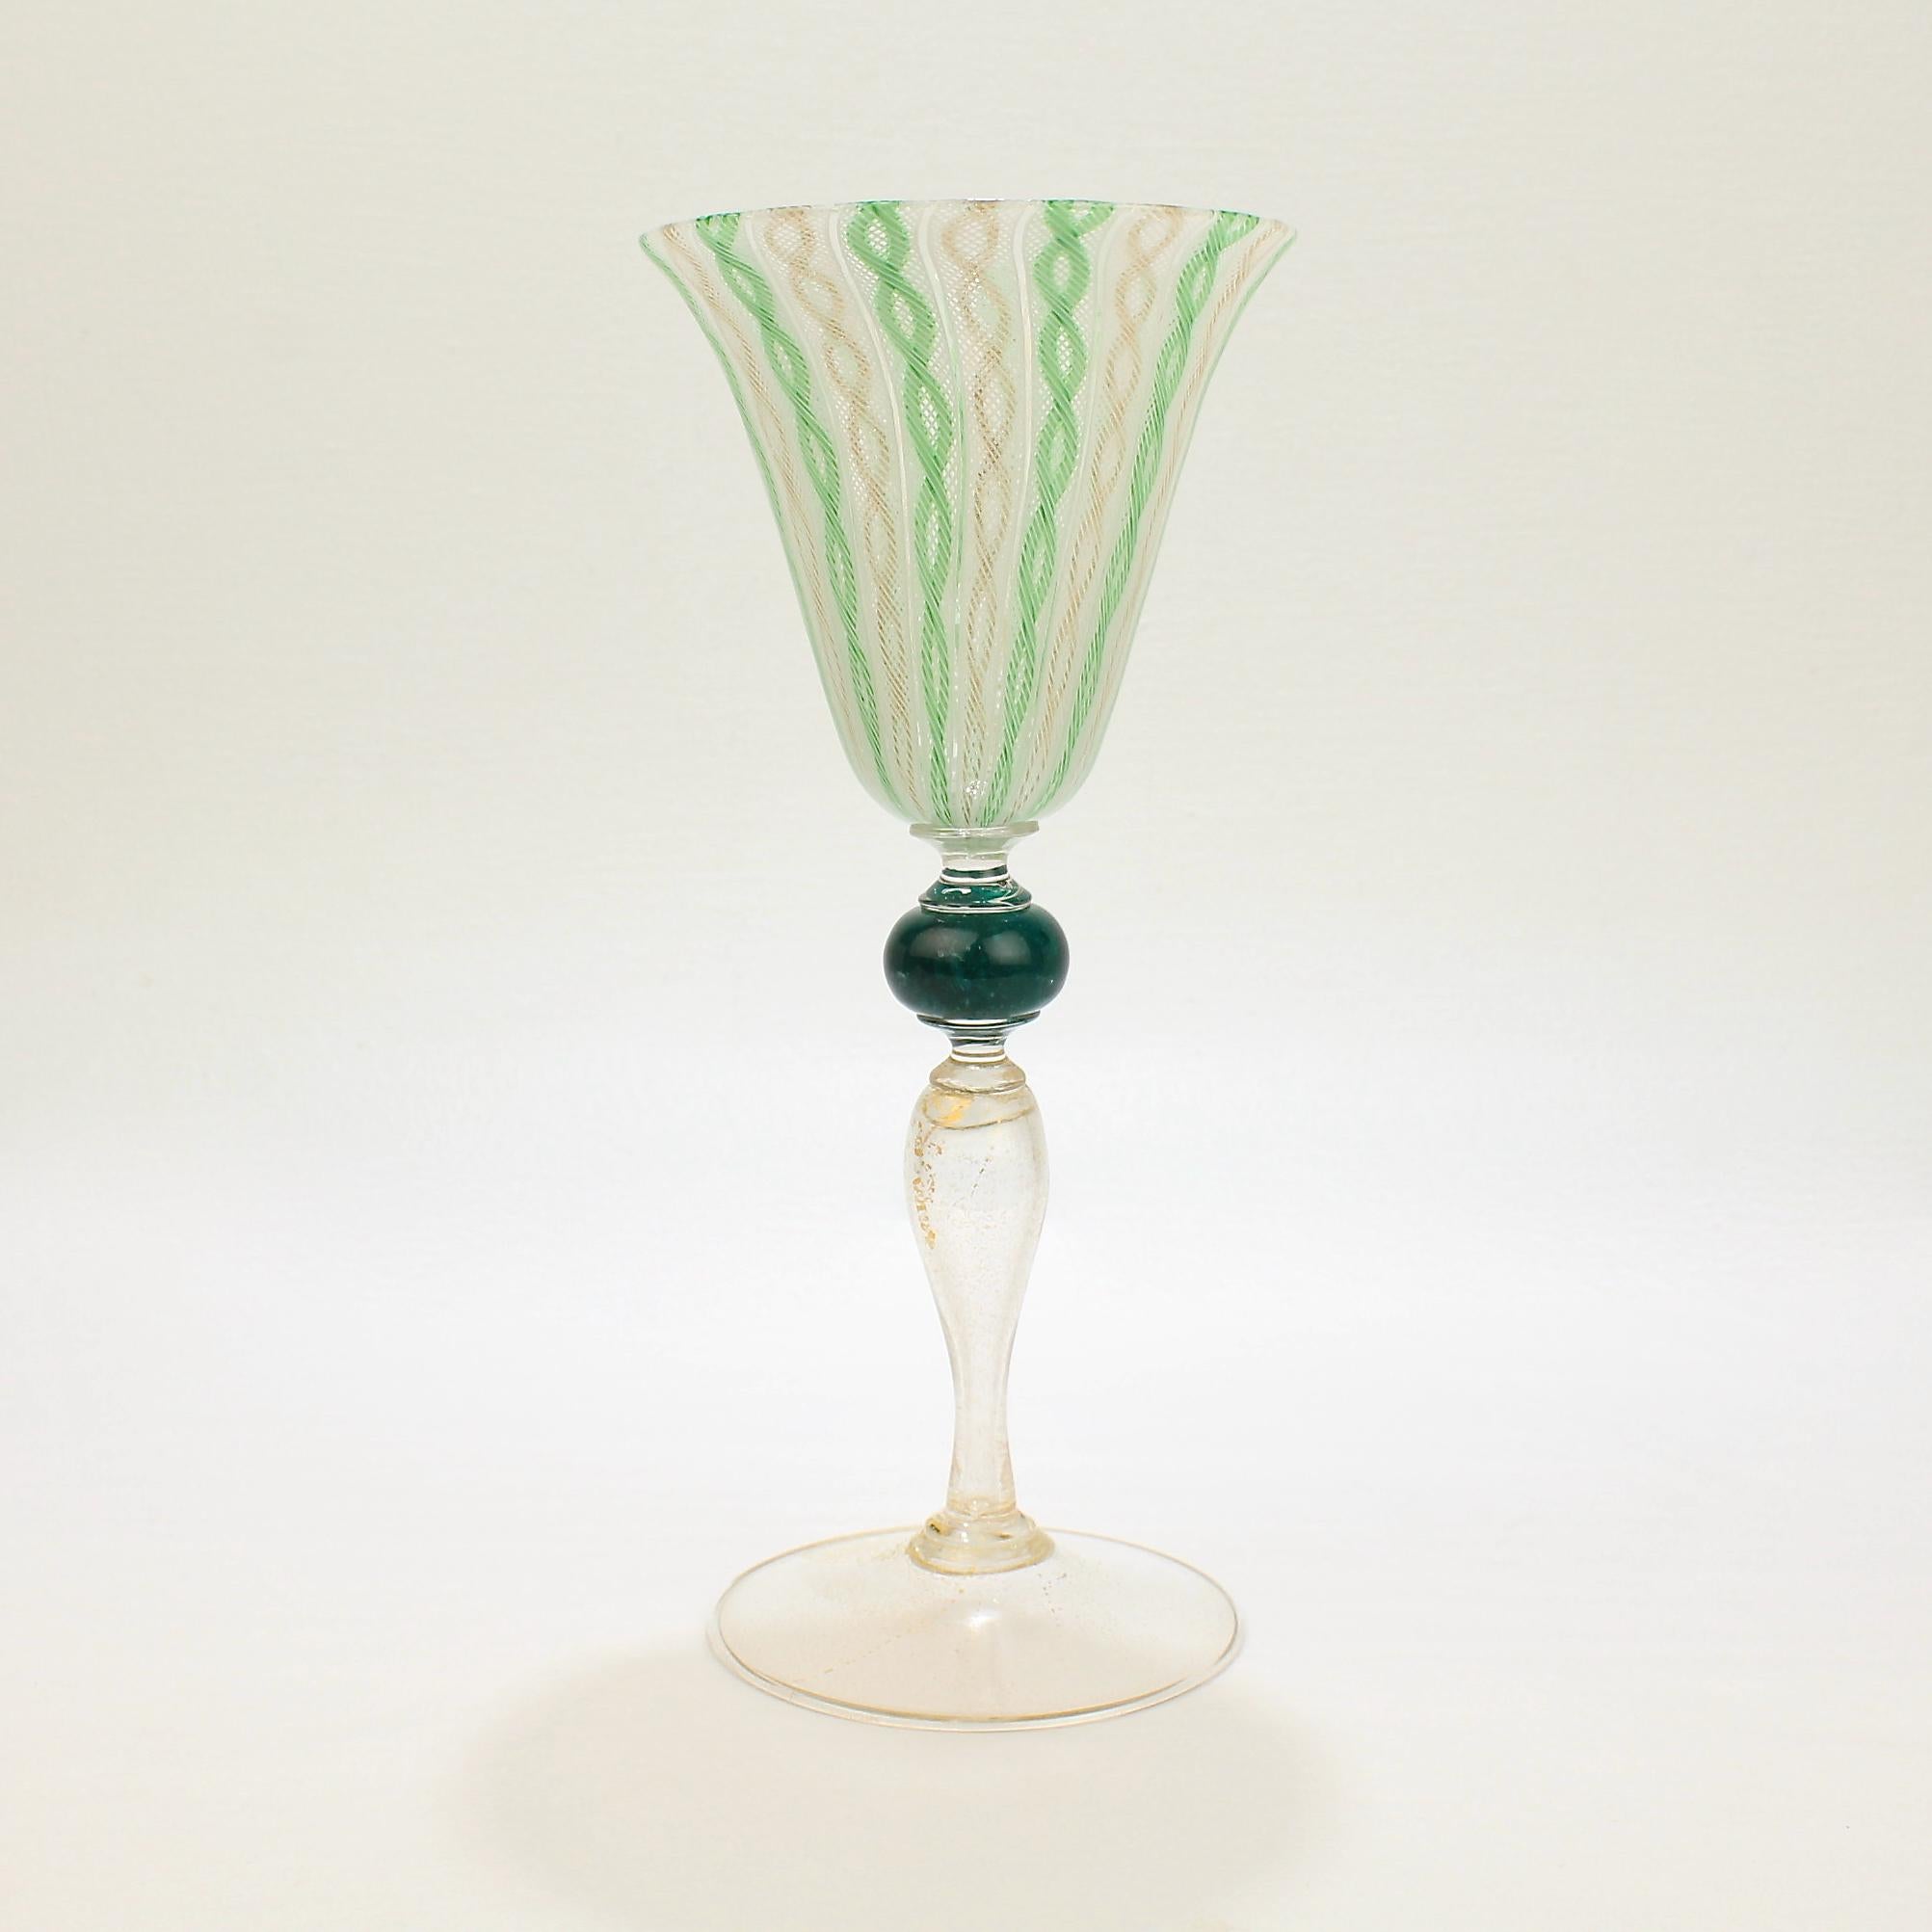 A wonderful large Venetian glass wine goblet with green, white, and gold latticinio swirl decoration. 

The goblet bowl rests on a suppressed ball knop, and the stem and foot have gold inclusions.

Attributed to Salviati.

Very fine